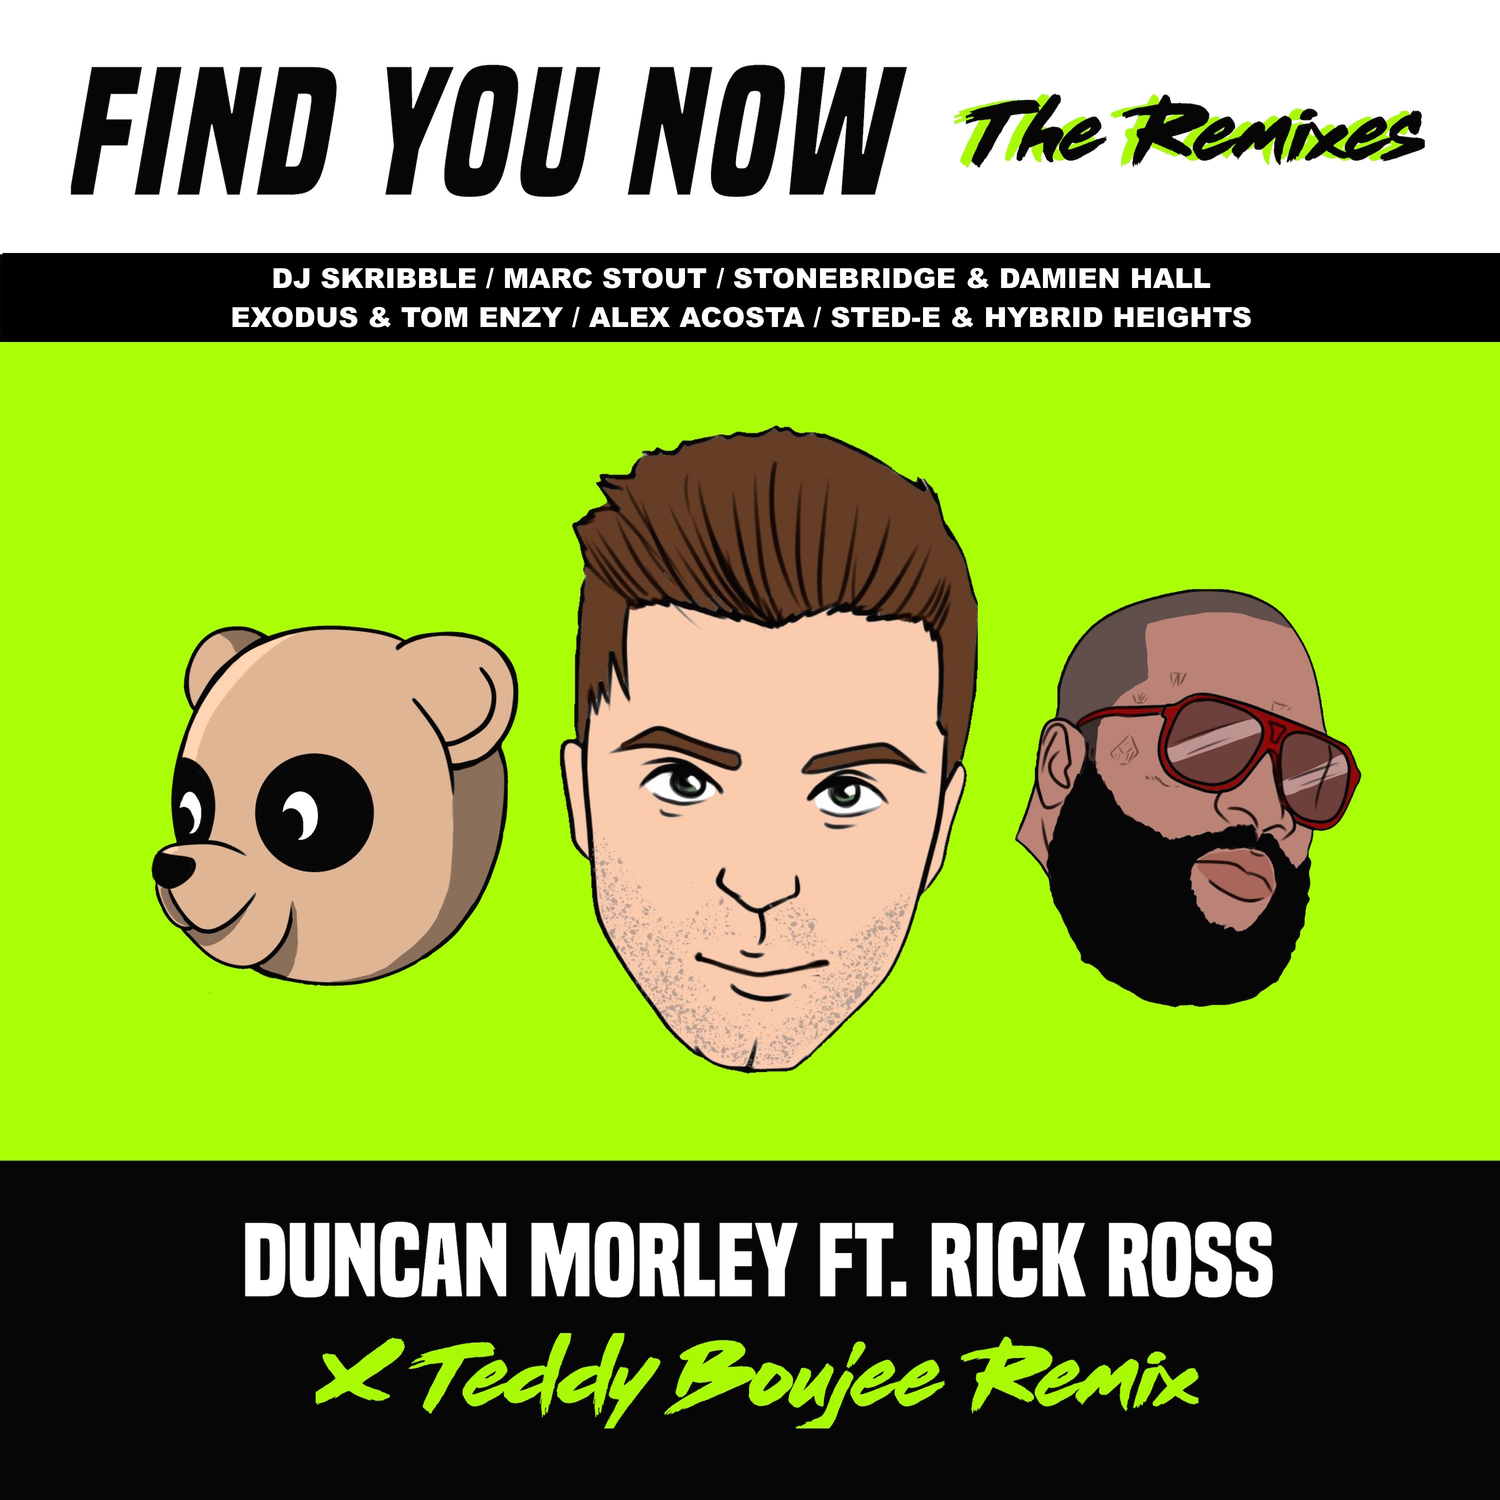 Find You Now (Sted-E & Hybrid Heights Radio Edit)